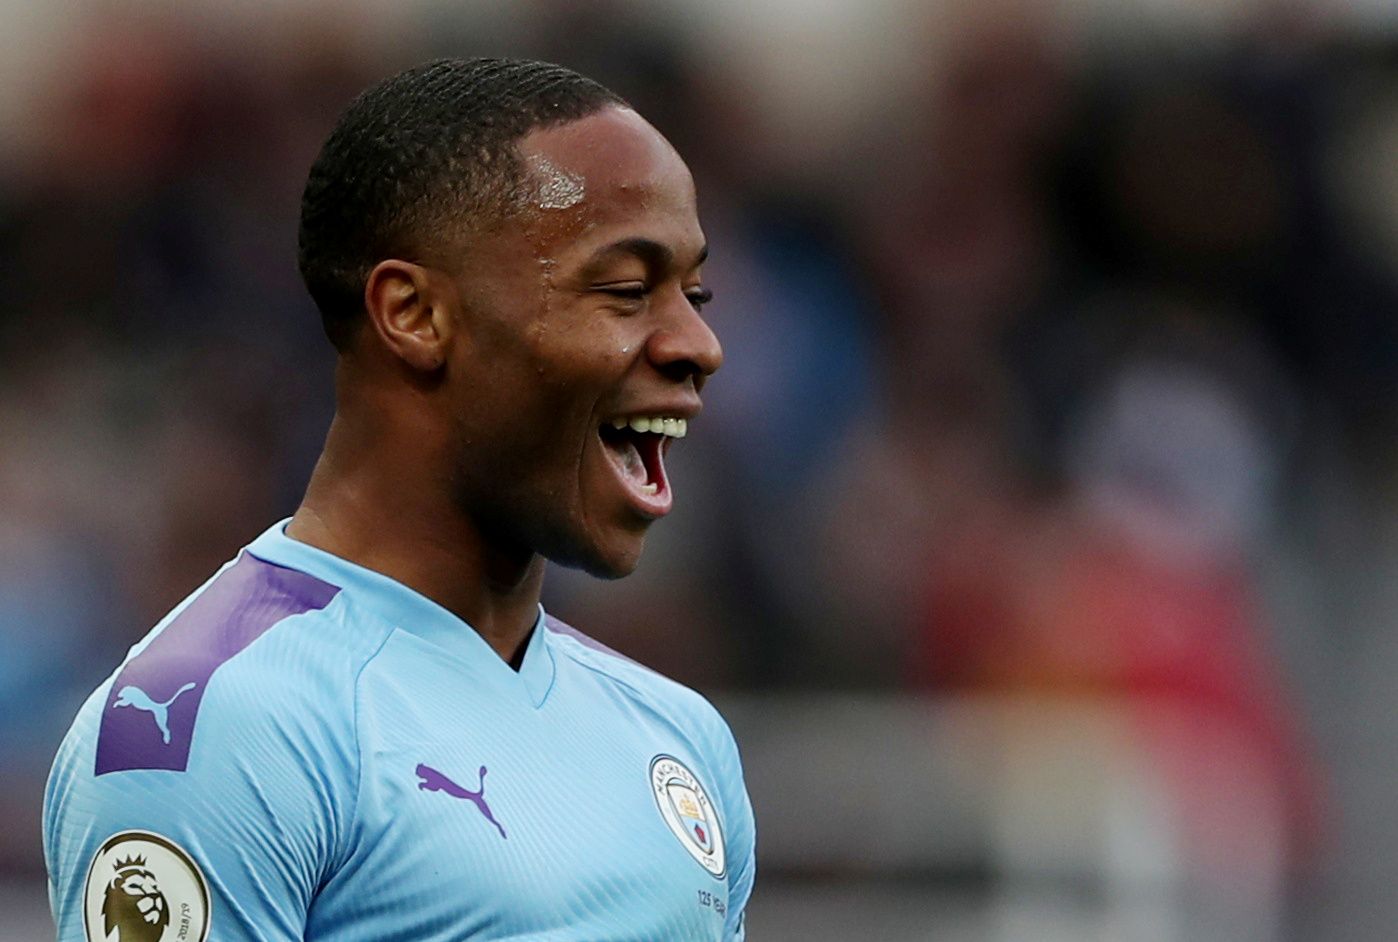 Soccer Football - Premier League - Newcastle United v Manchester City - St James' Park, Newcastle, Britain - November 30, 2019  Manchester City's Raheem Sterling celebrates scoring their first goal  Action Images via Reuters/Lee Smith  EDITORIAL USE ONLY. No use with unauthorized audio, video, data, fixture lists, club/league logos or 